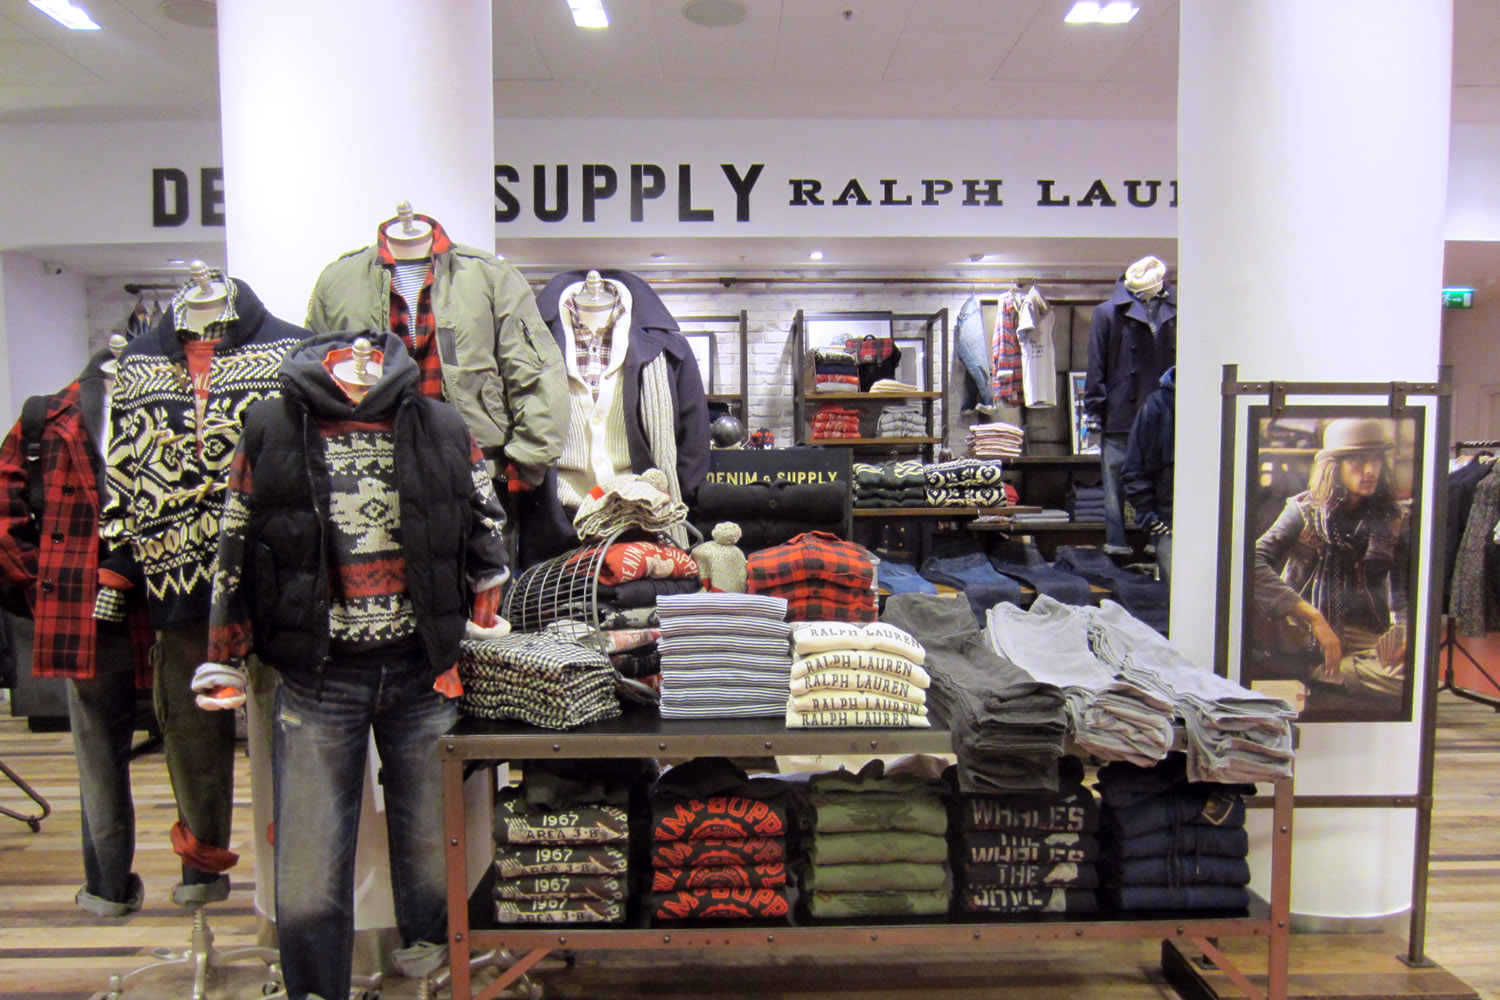 polo ralph lauren denim and supply outlet